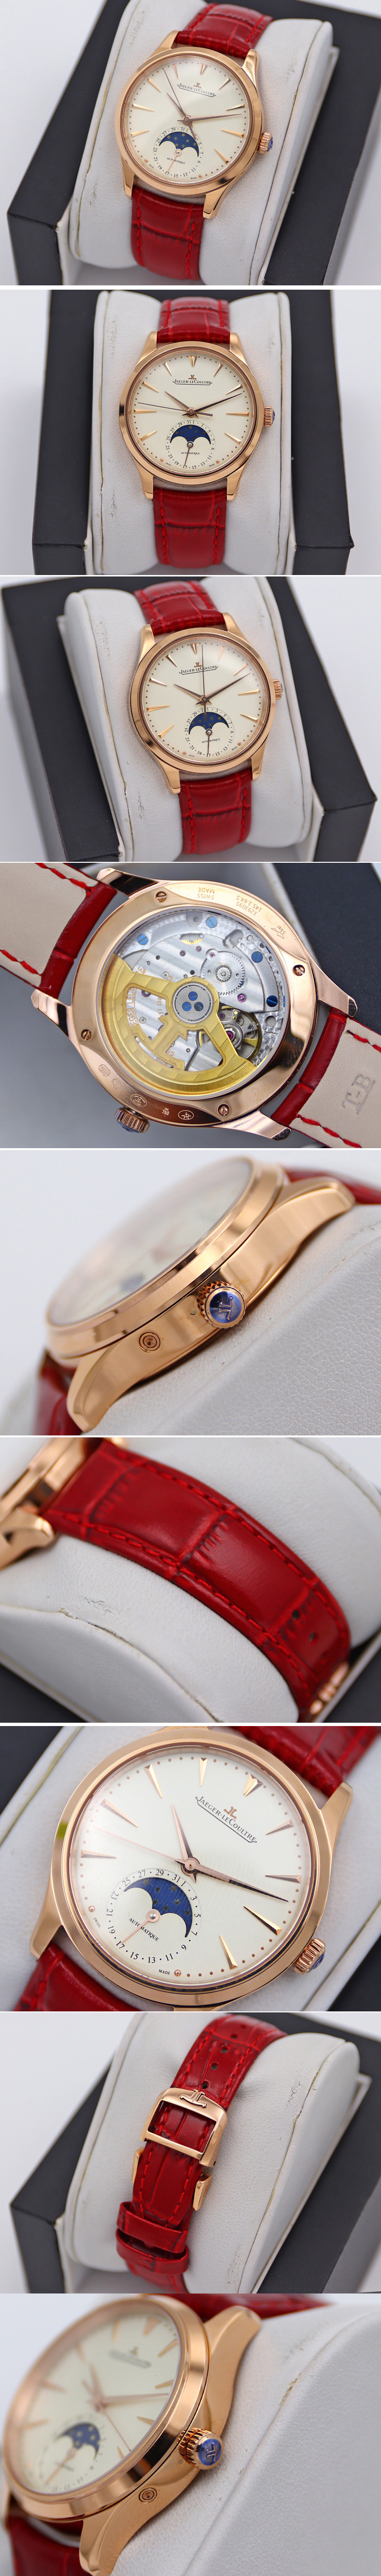 Replica Jaeger-LeCoultre Master Ultra Thin Moonphase RG/LE White Dial Red Leather Strap TW MY9015 to Cal.925